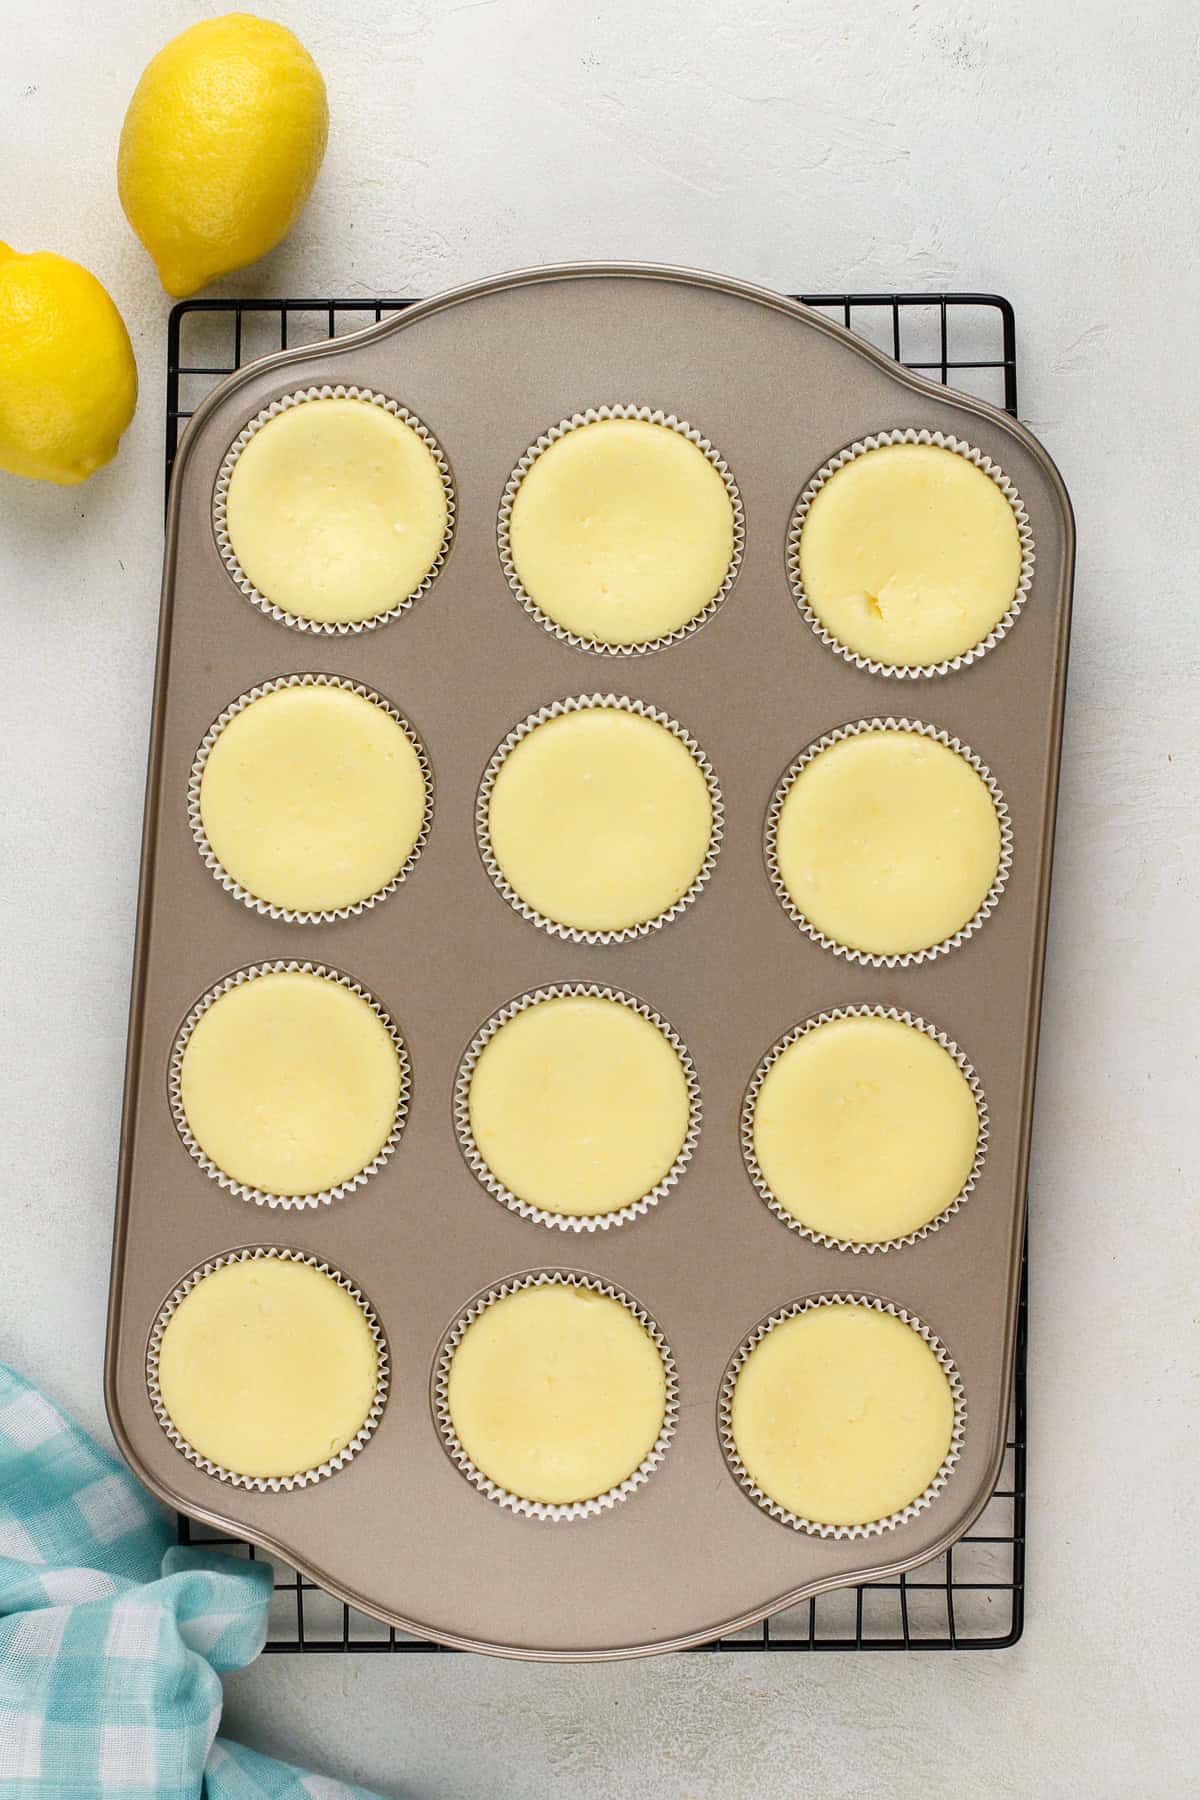 baked and cooled mini lemon cheesecakes in a muffin pan.